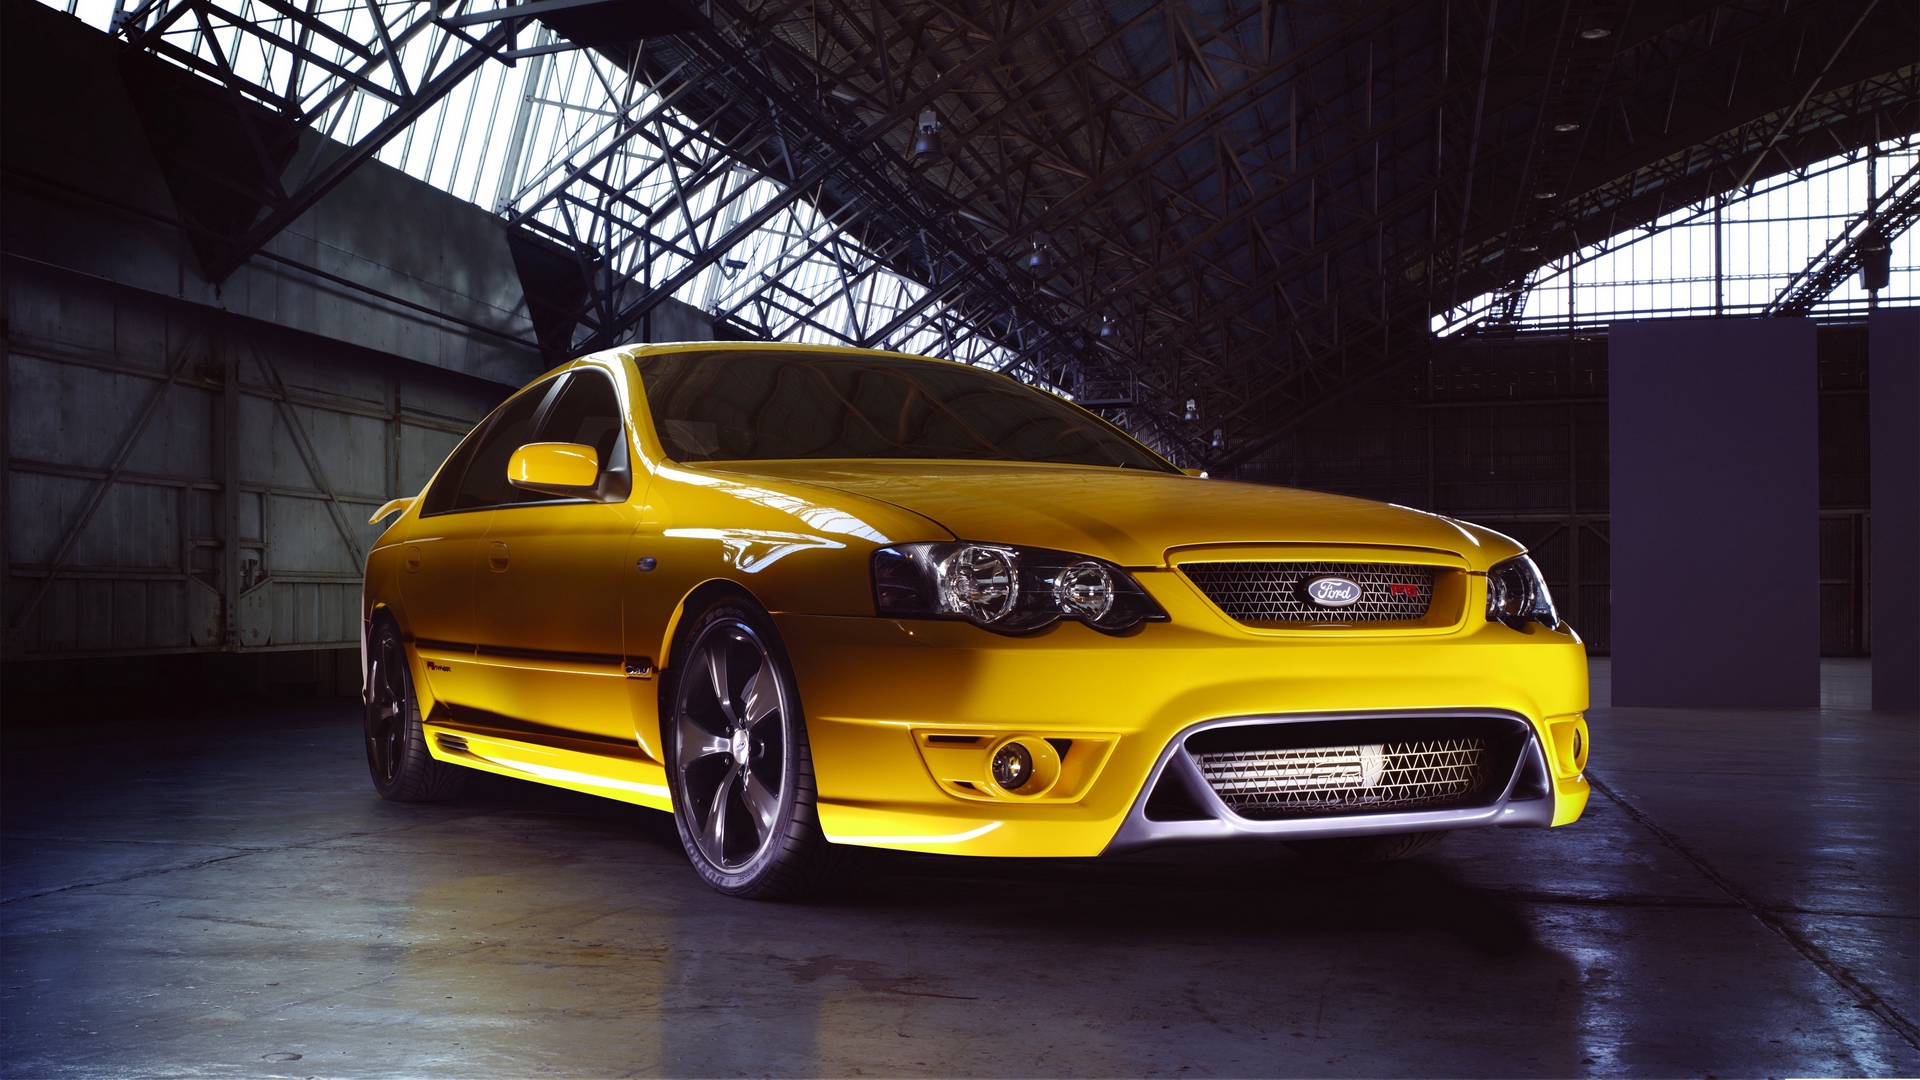 Wallpaper Ford Falcon, Fpv, F6, Yellow, Side View - Ford Falcon Iphone Background - HD Wallpaper 